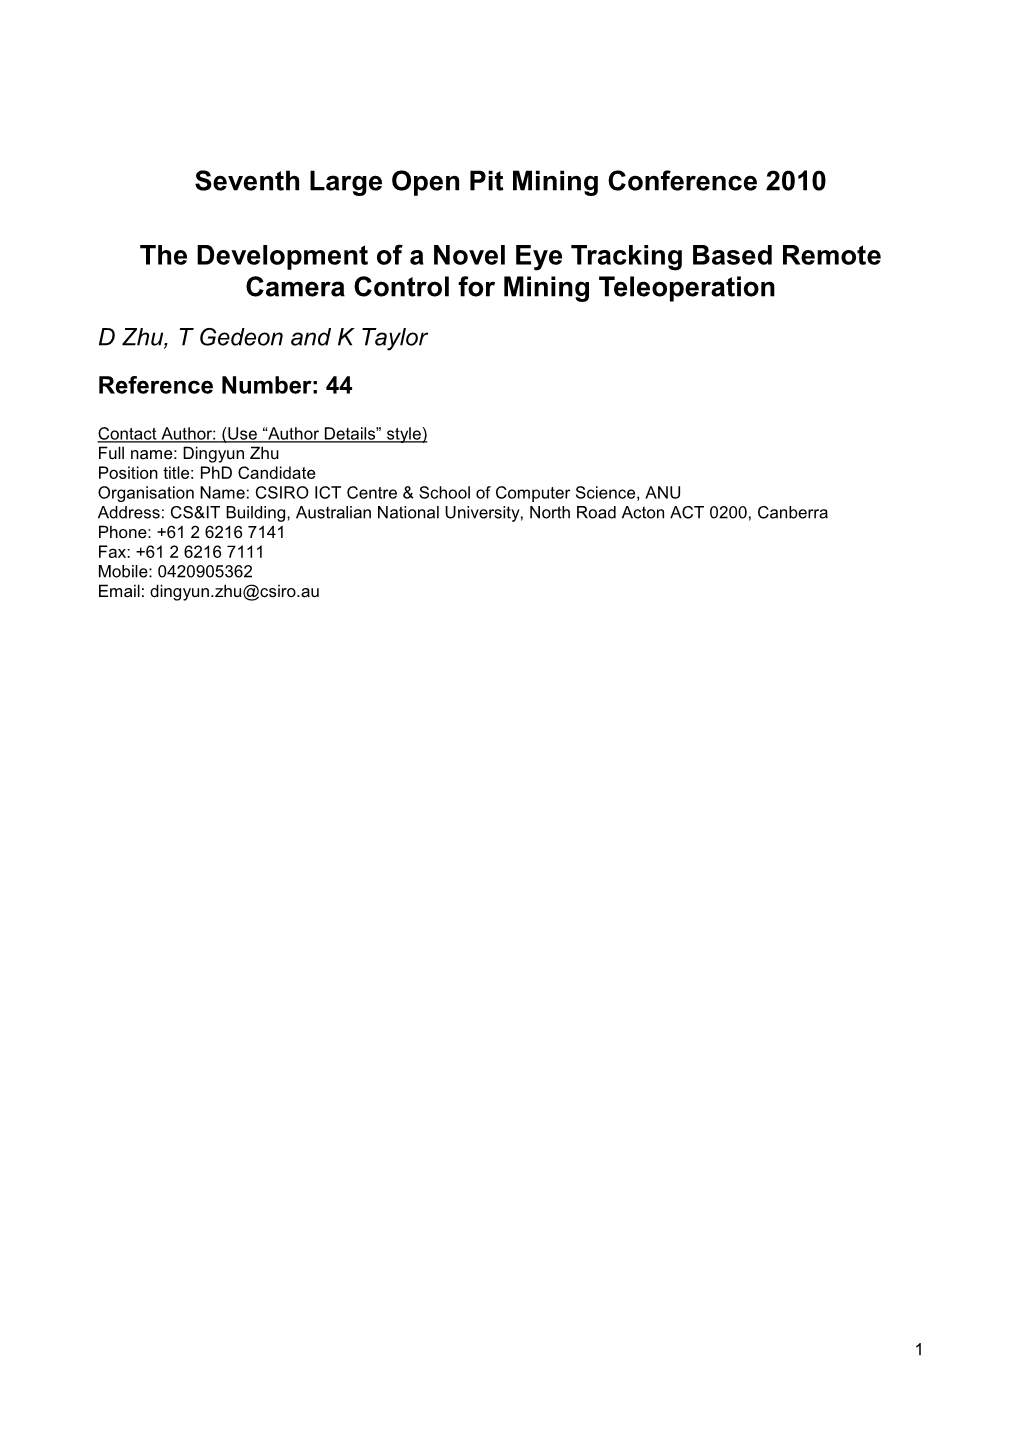 The Development of a Novel Eye Tracking Based Remote Camera Control for Mining Teleoperation